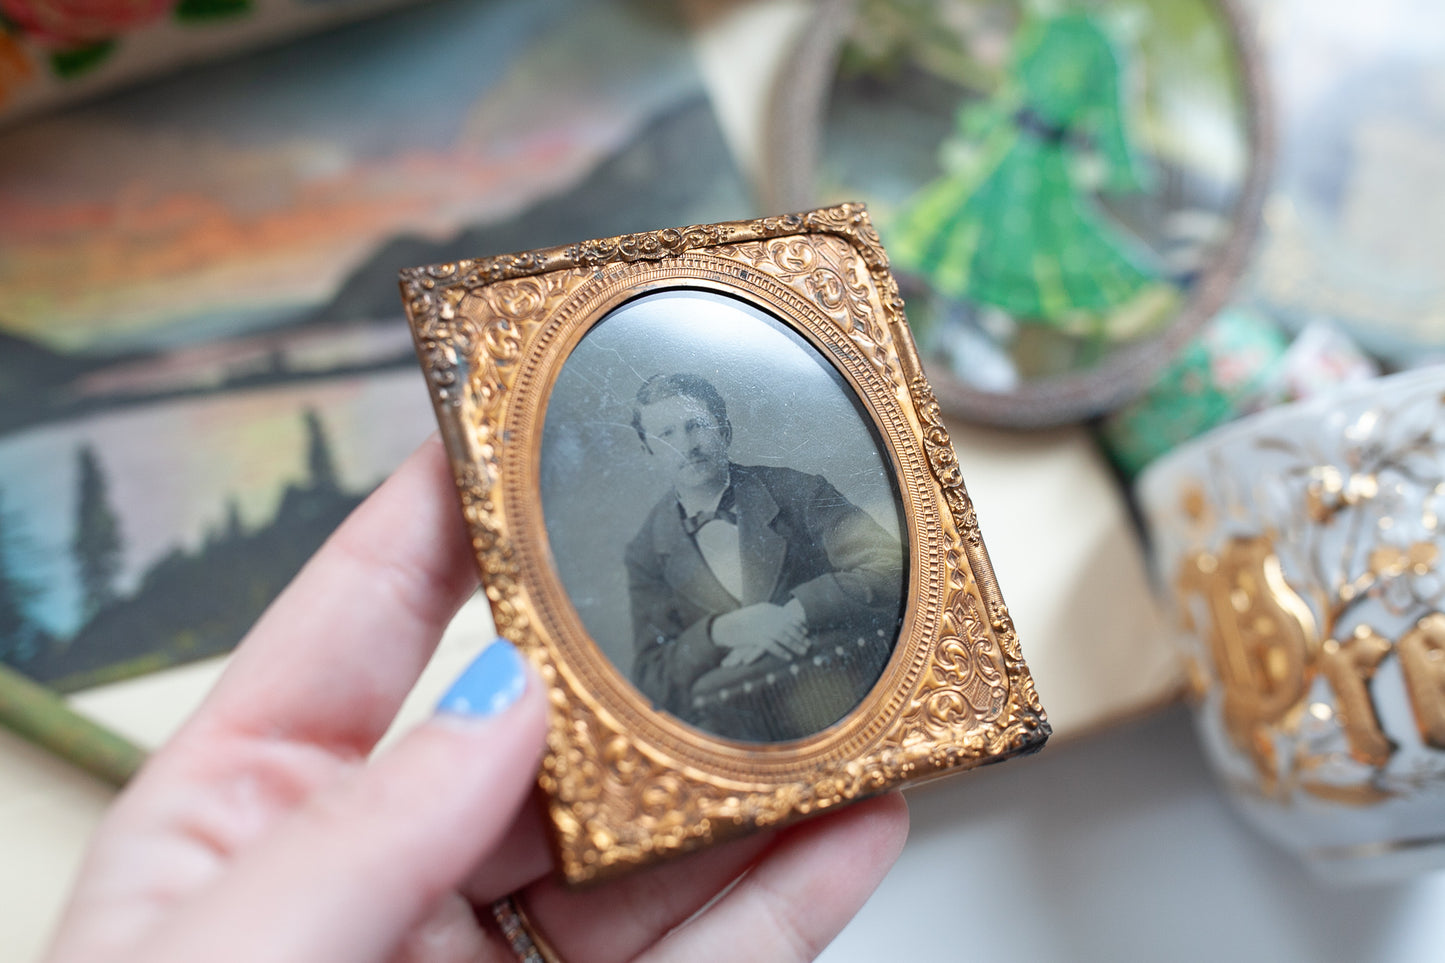 Framed Portrait -Small Tintype Framed-Antique Tin Type Photo Man